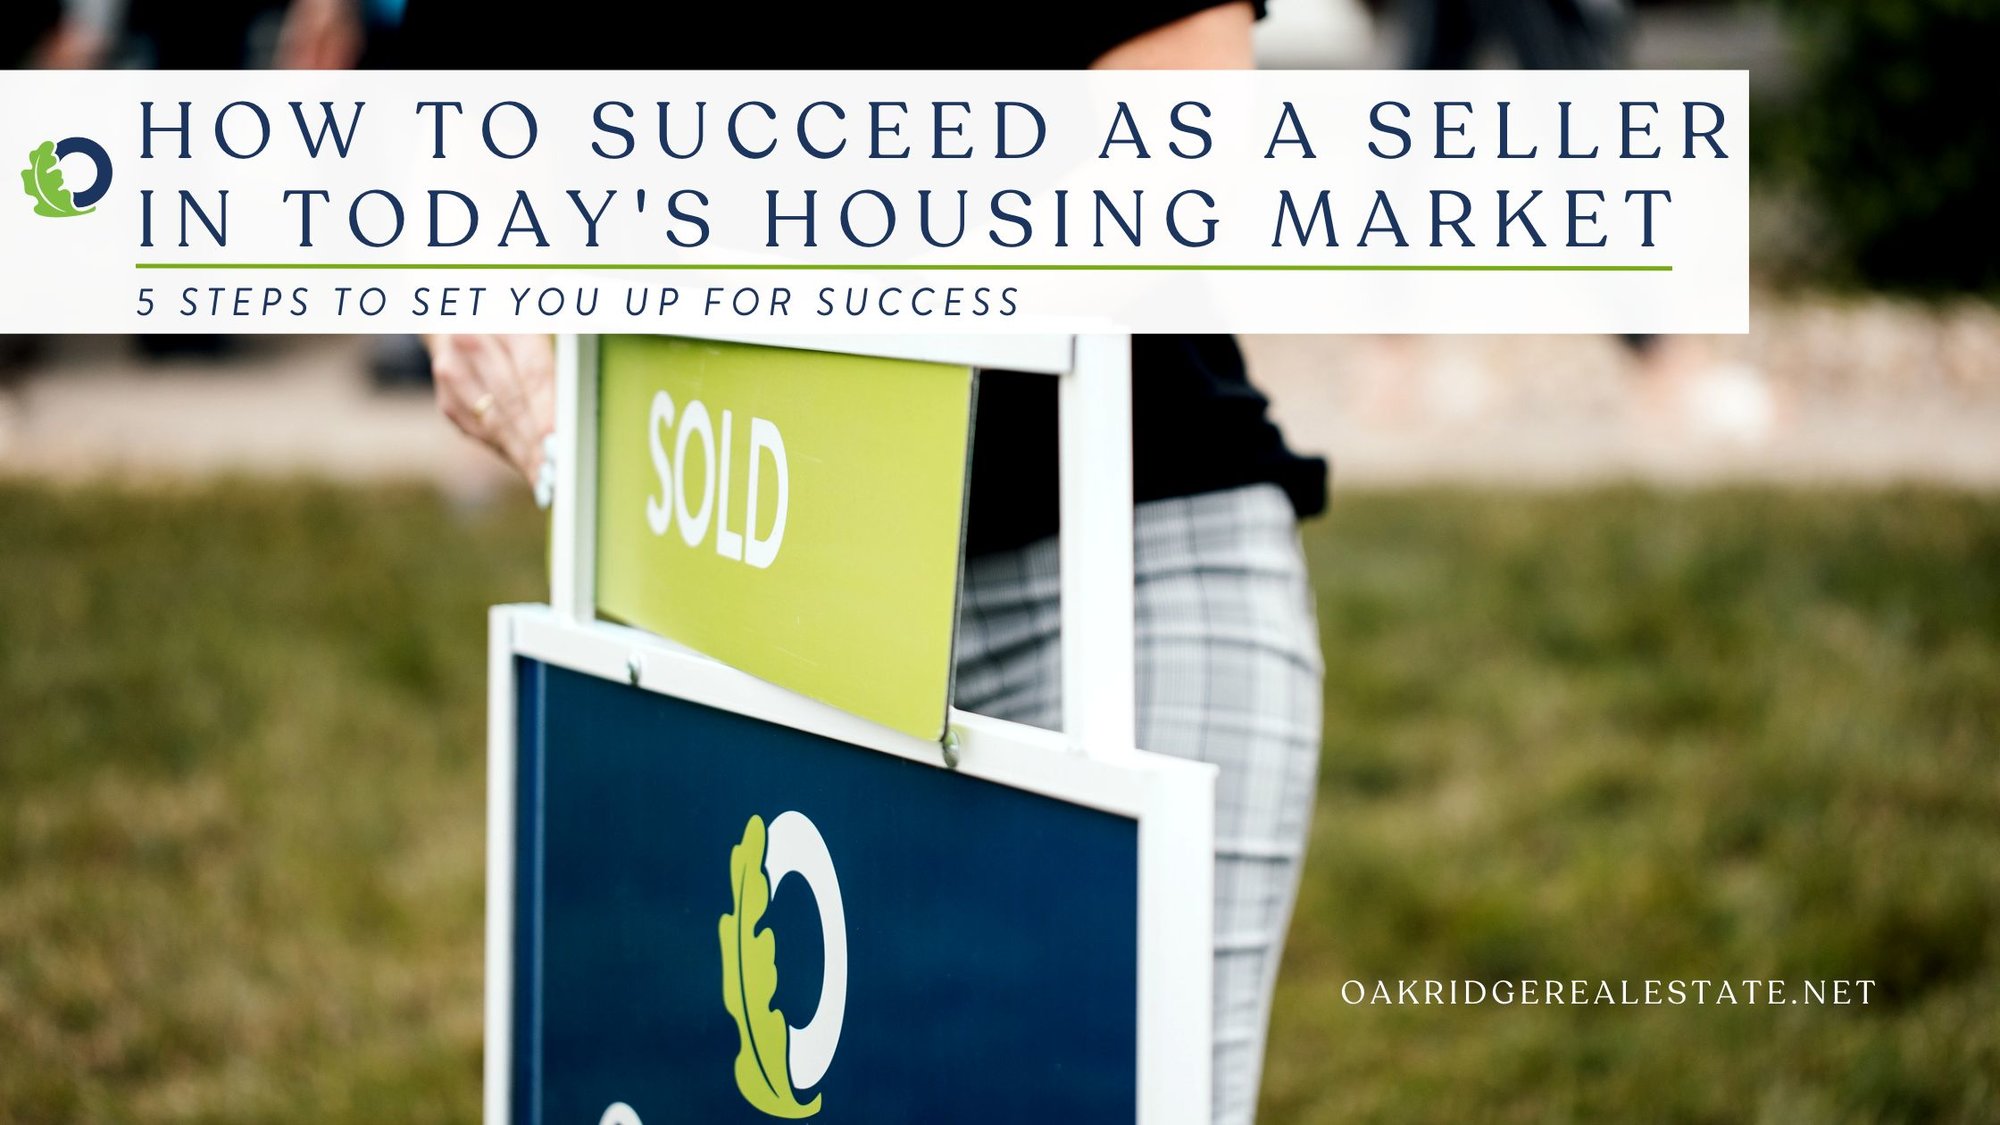 How to Succeed as a Seller in Today's Housing Market | Oakridge Real Estate